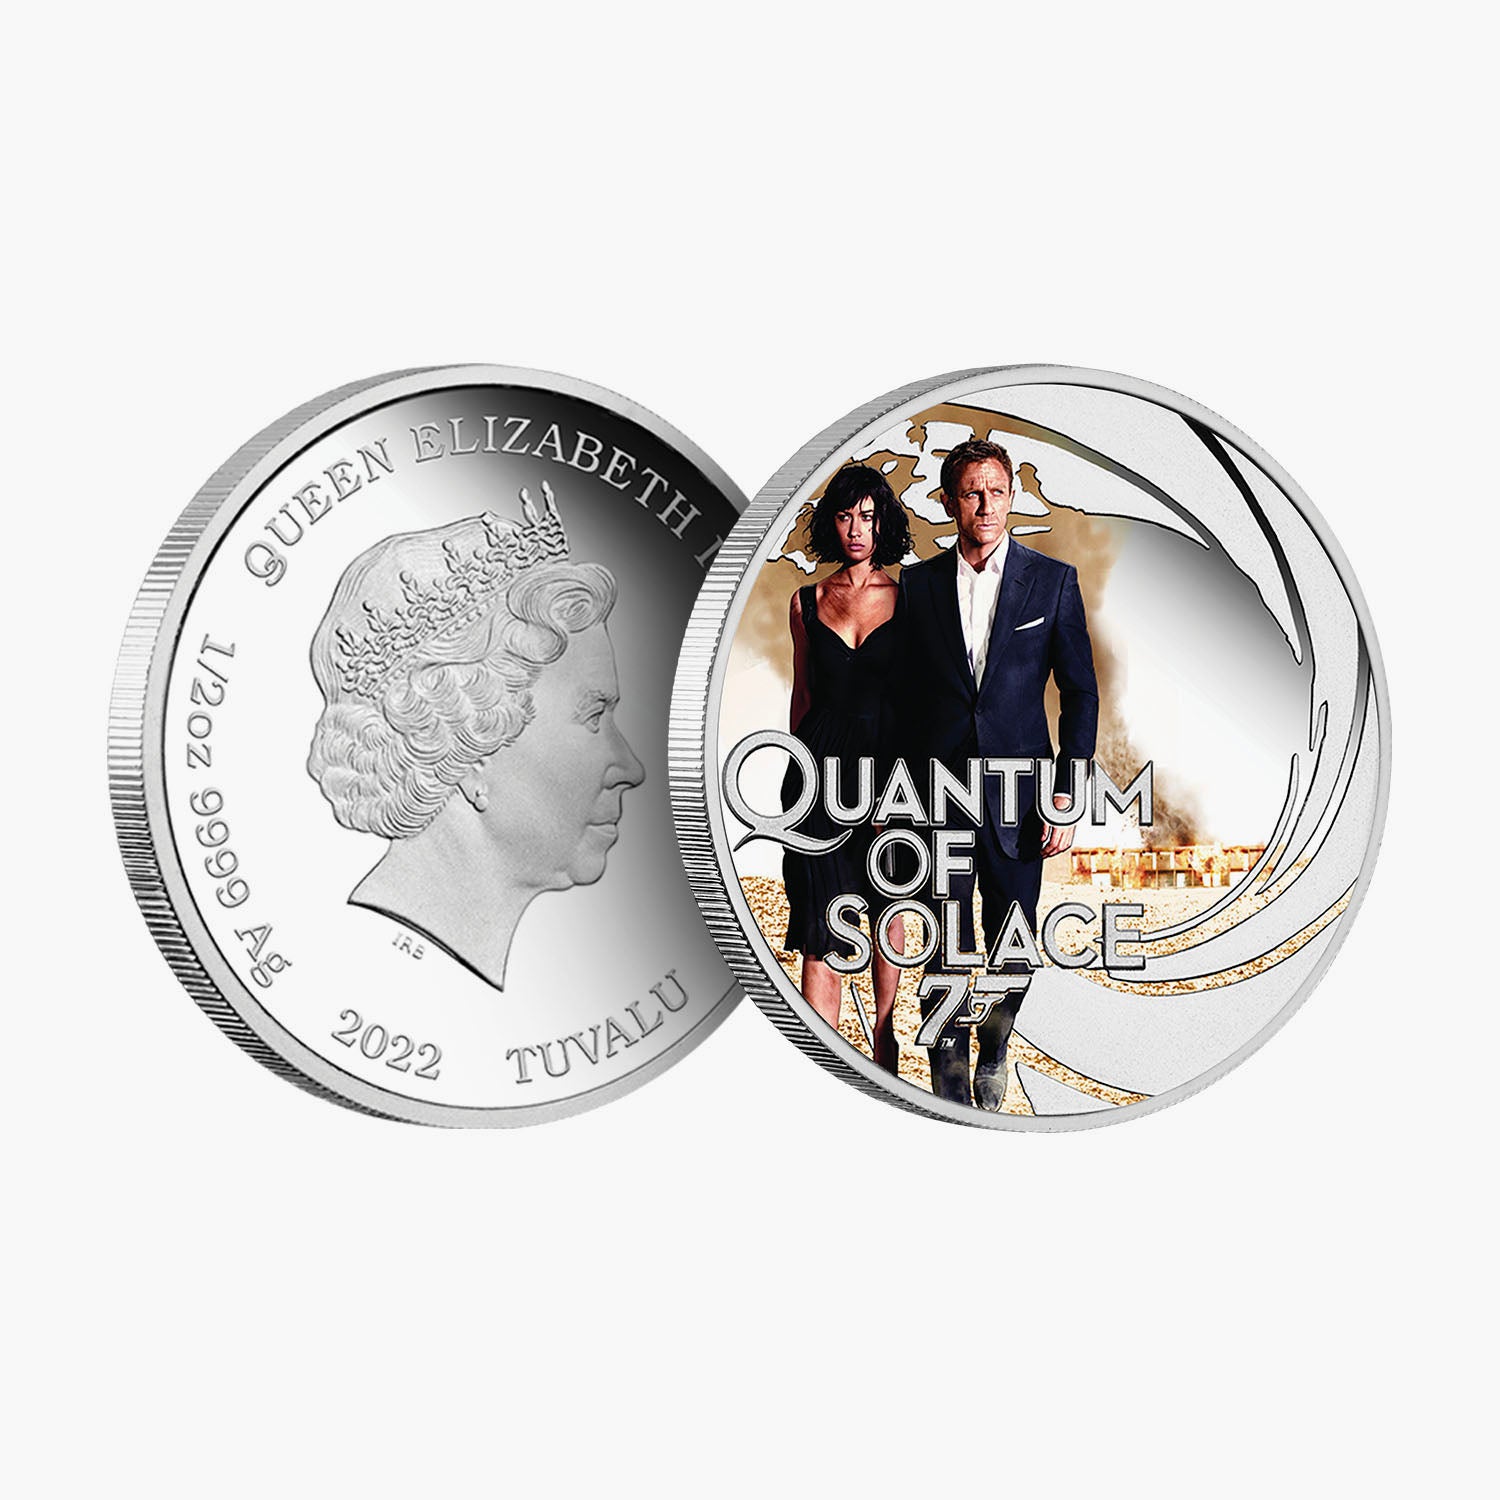 James Bond - Quantum of Solace Solid Silver Movie Coin